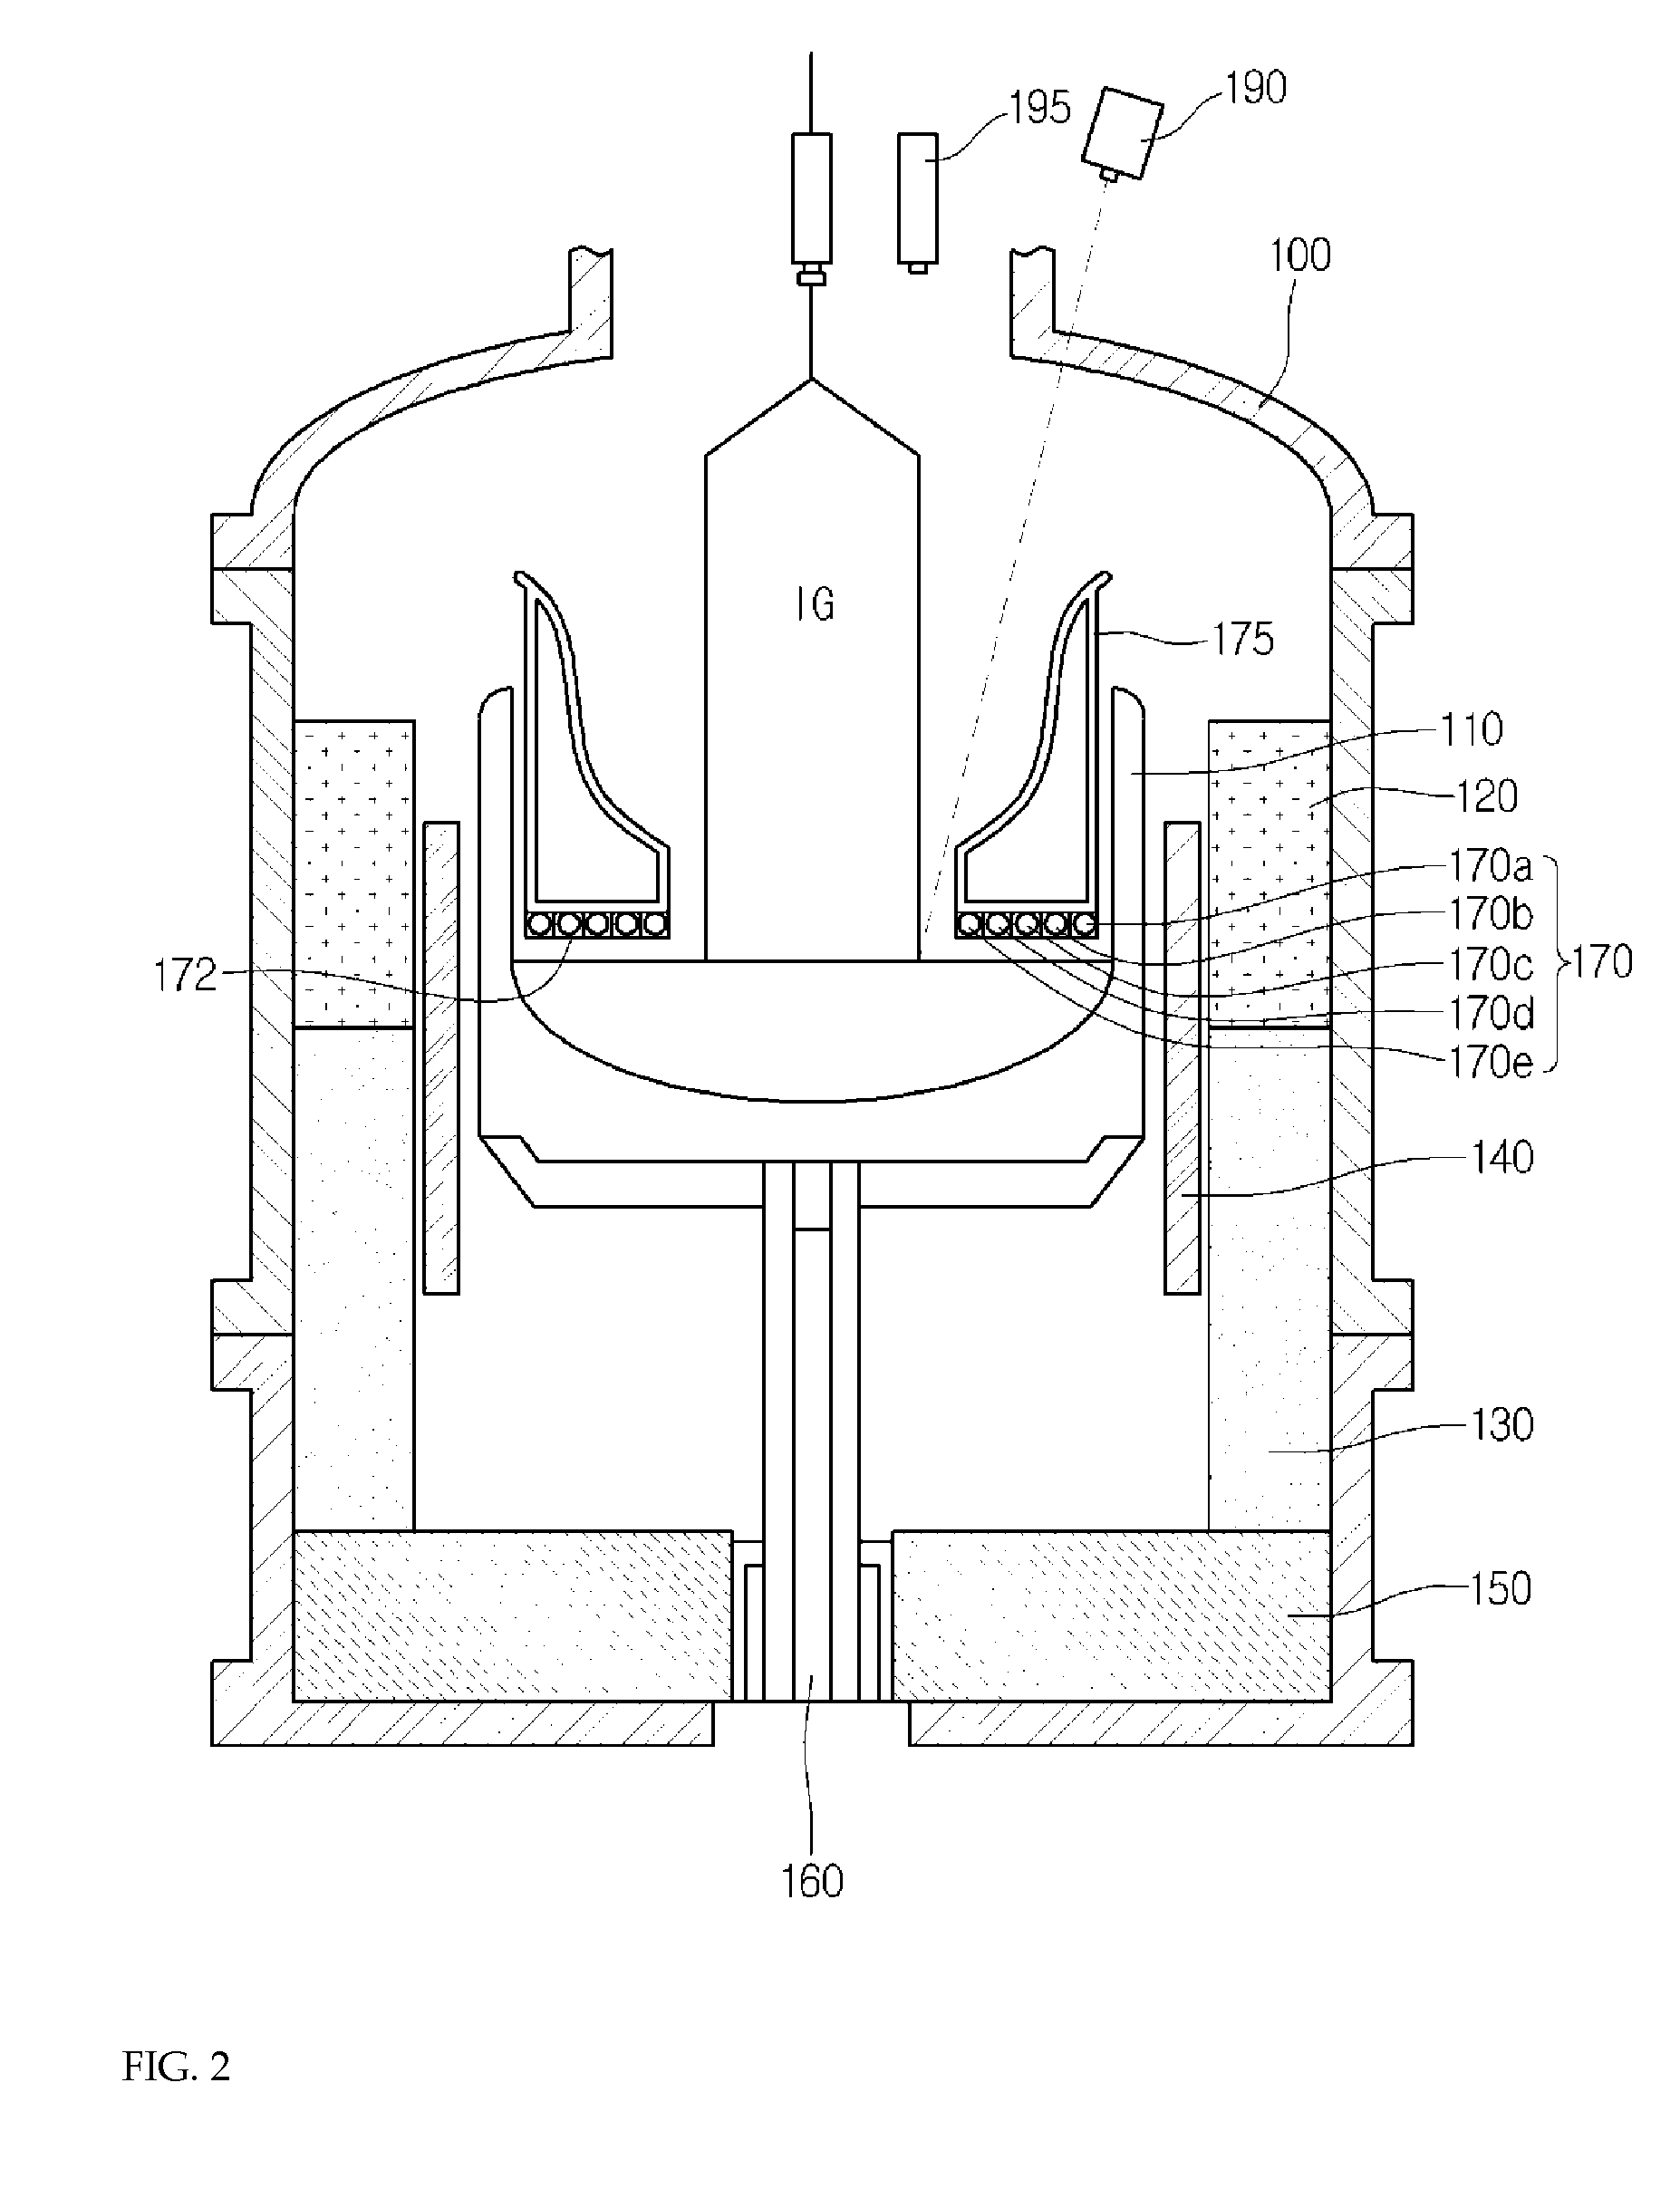 Silicon single crystal growing device and method of growing the same